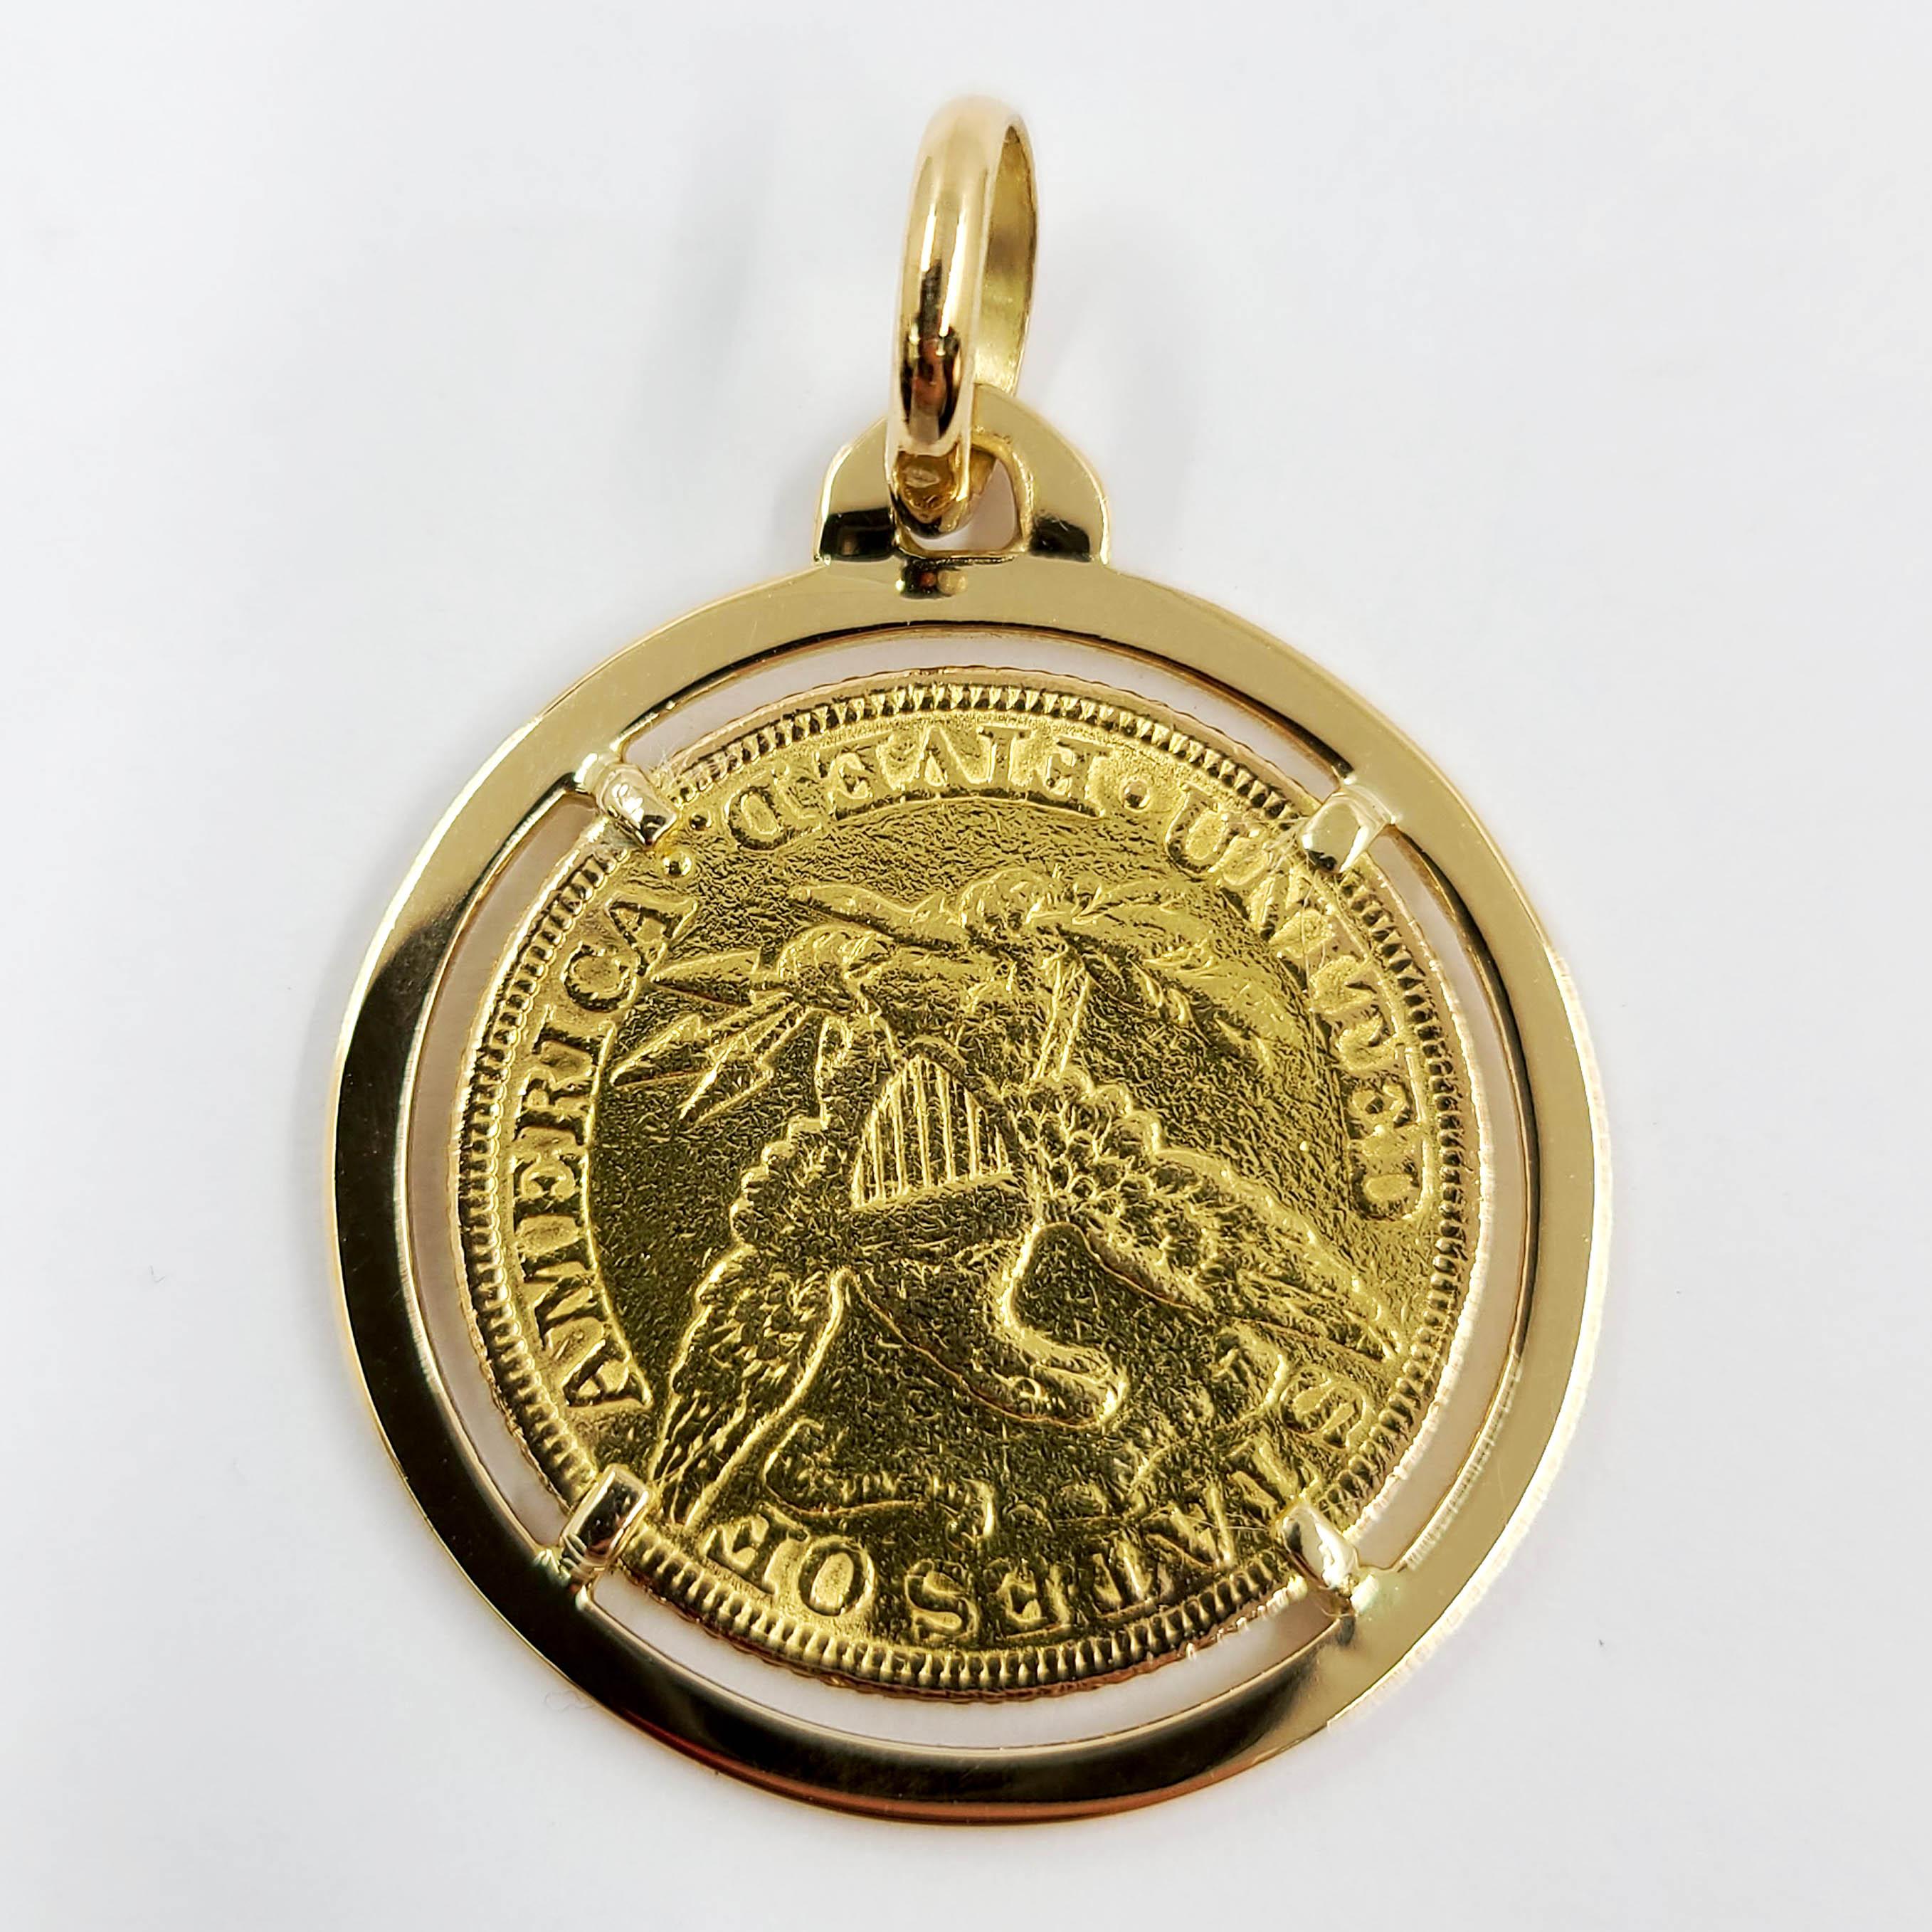 22 Karat Yellow Gold US $5 Coin From 1882 Set In An 18 Karat Yellow Gold Frame With Flexible Jump Ring. Finished Weight is 10.8 Grams.